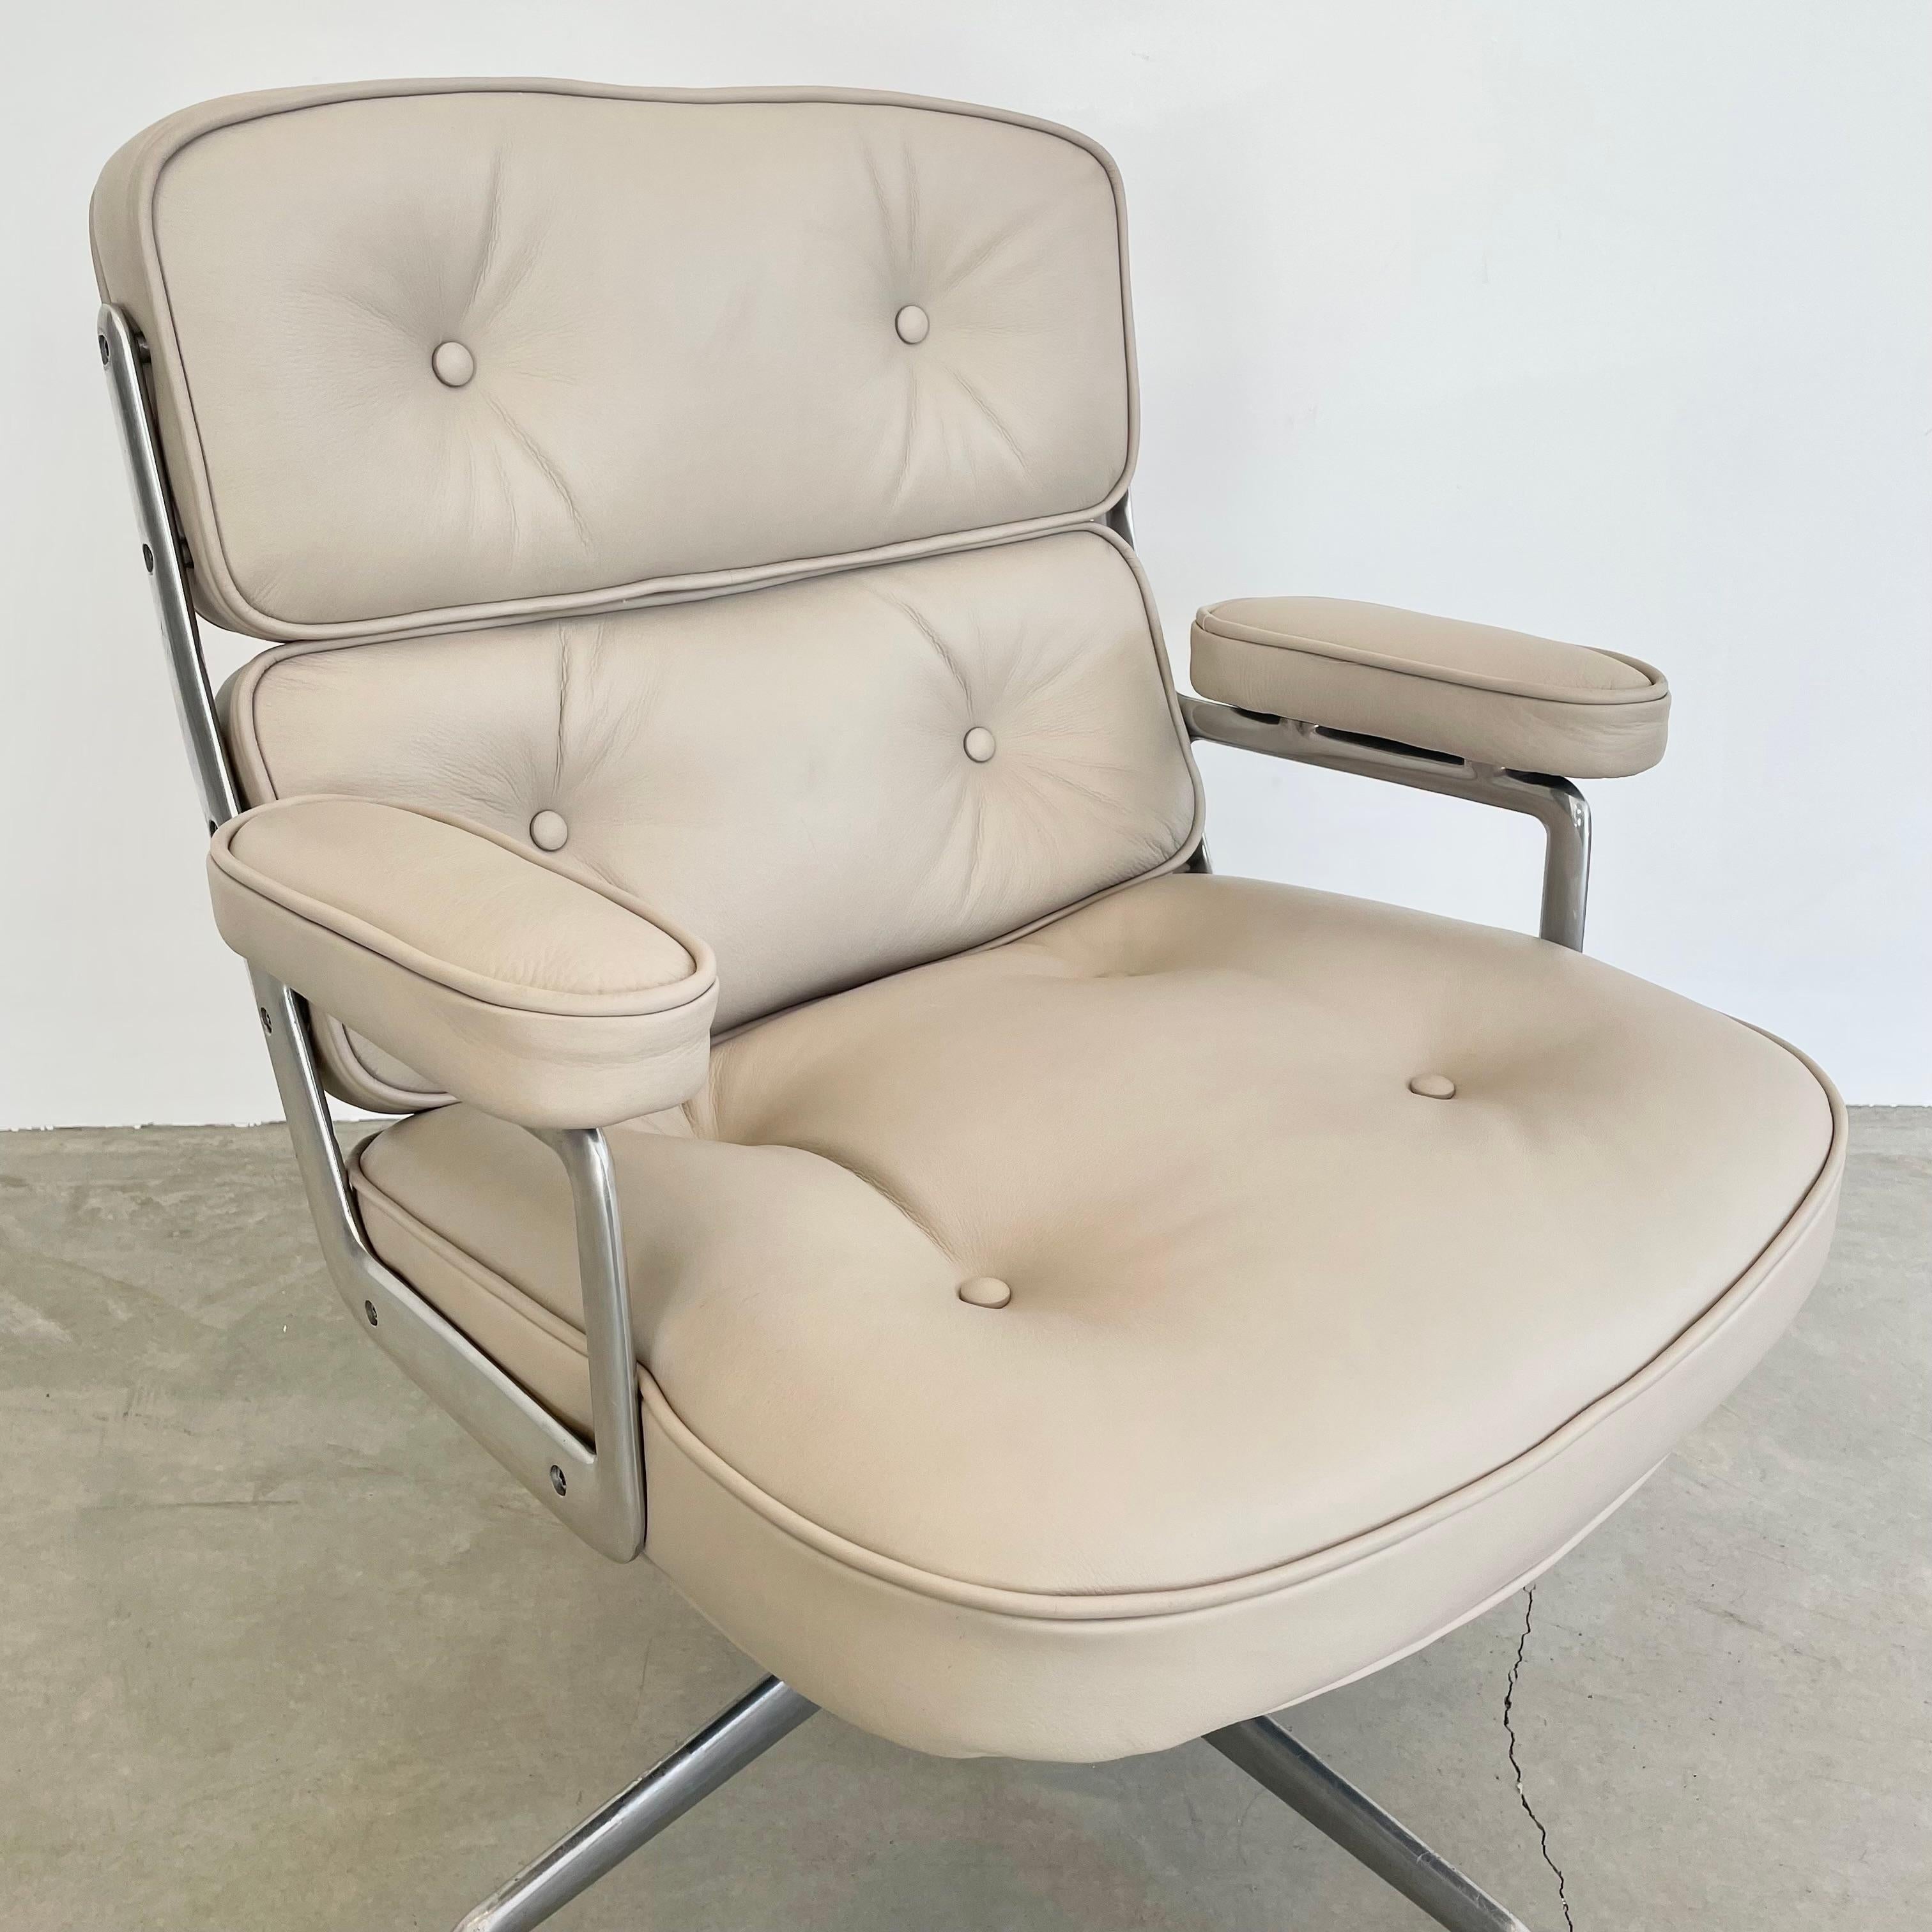 Eames Time Life Chair in Grey Leather for Herman Miller, 1980s For Sale 3